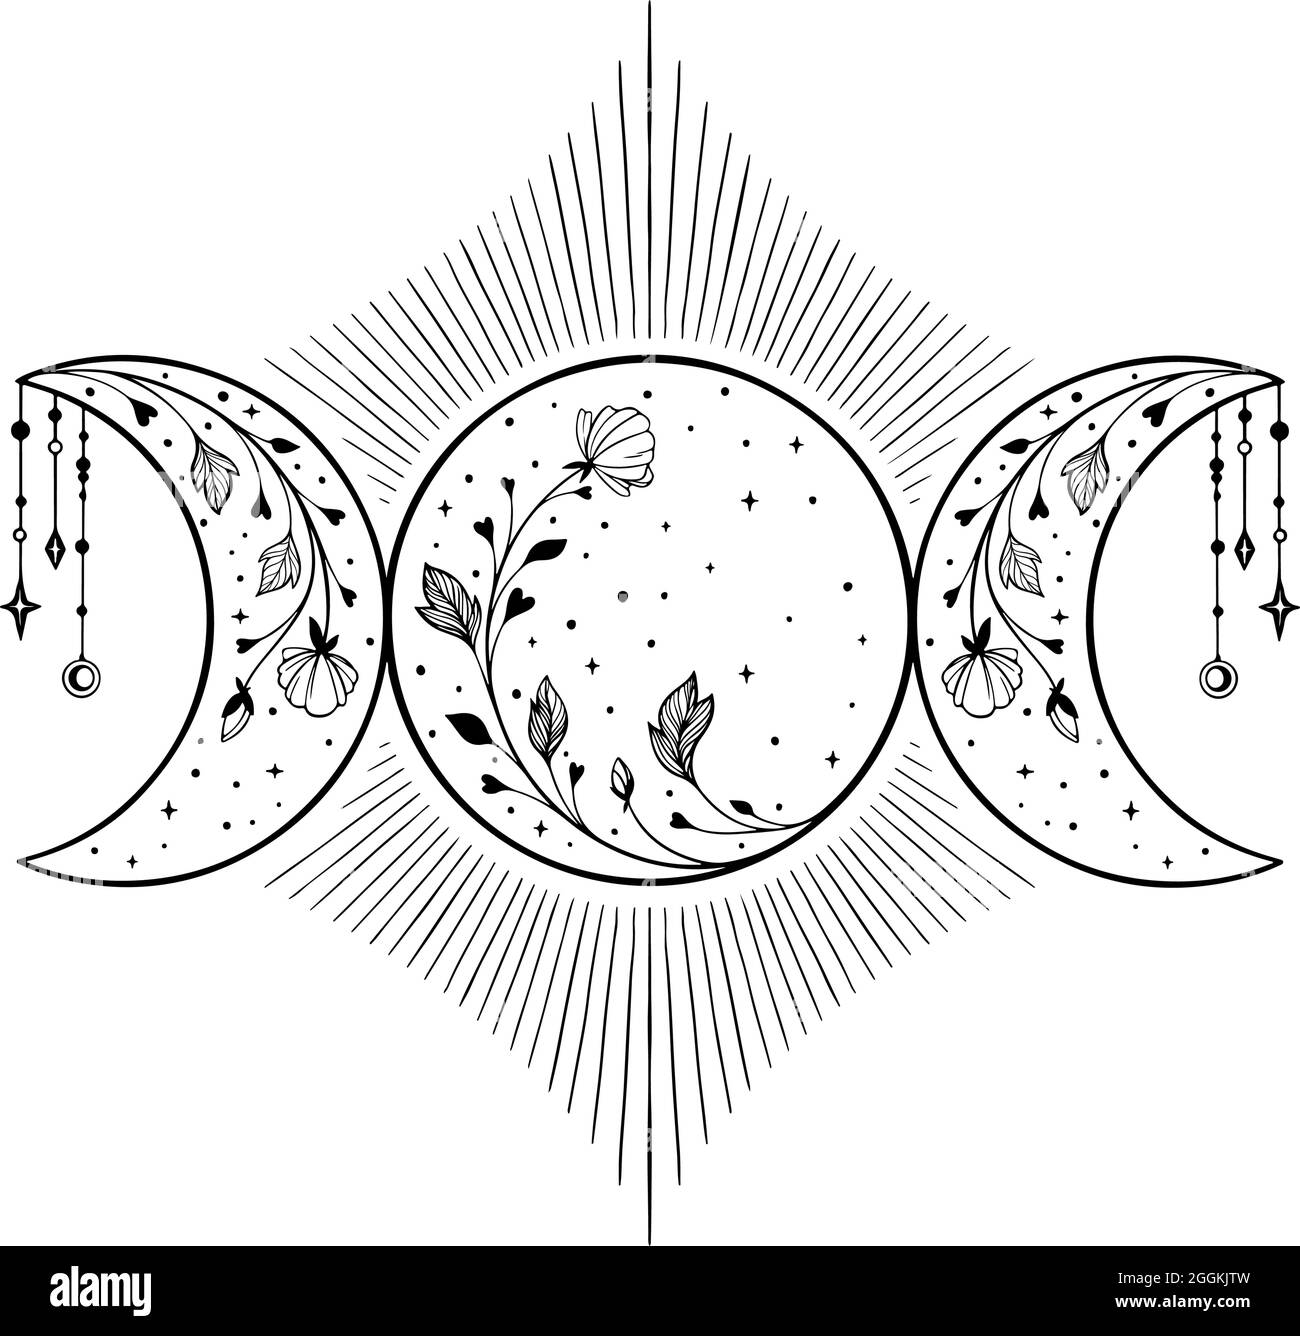 Triple moon symbol with flowers and stars Stock Vector